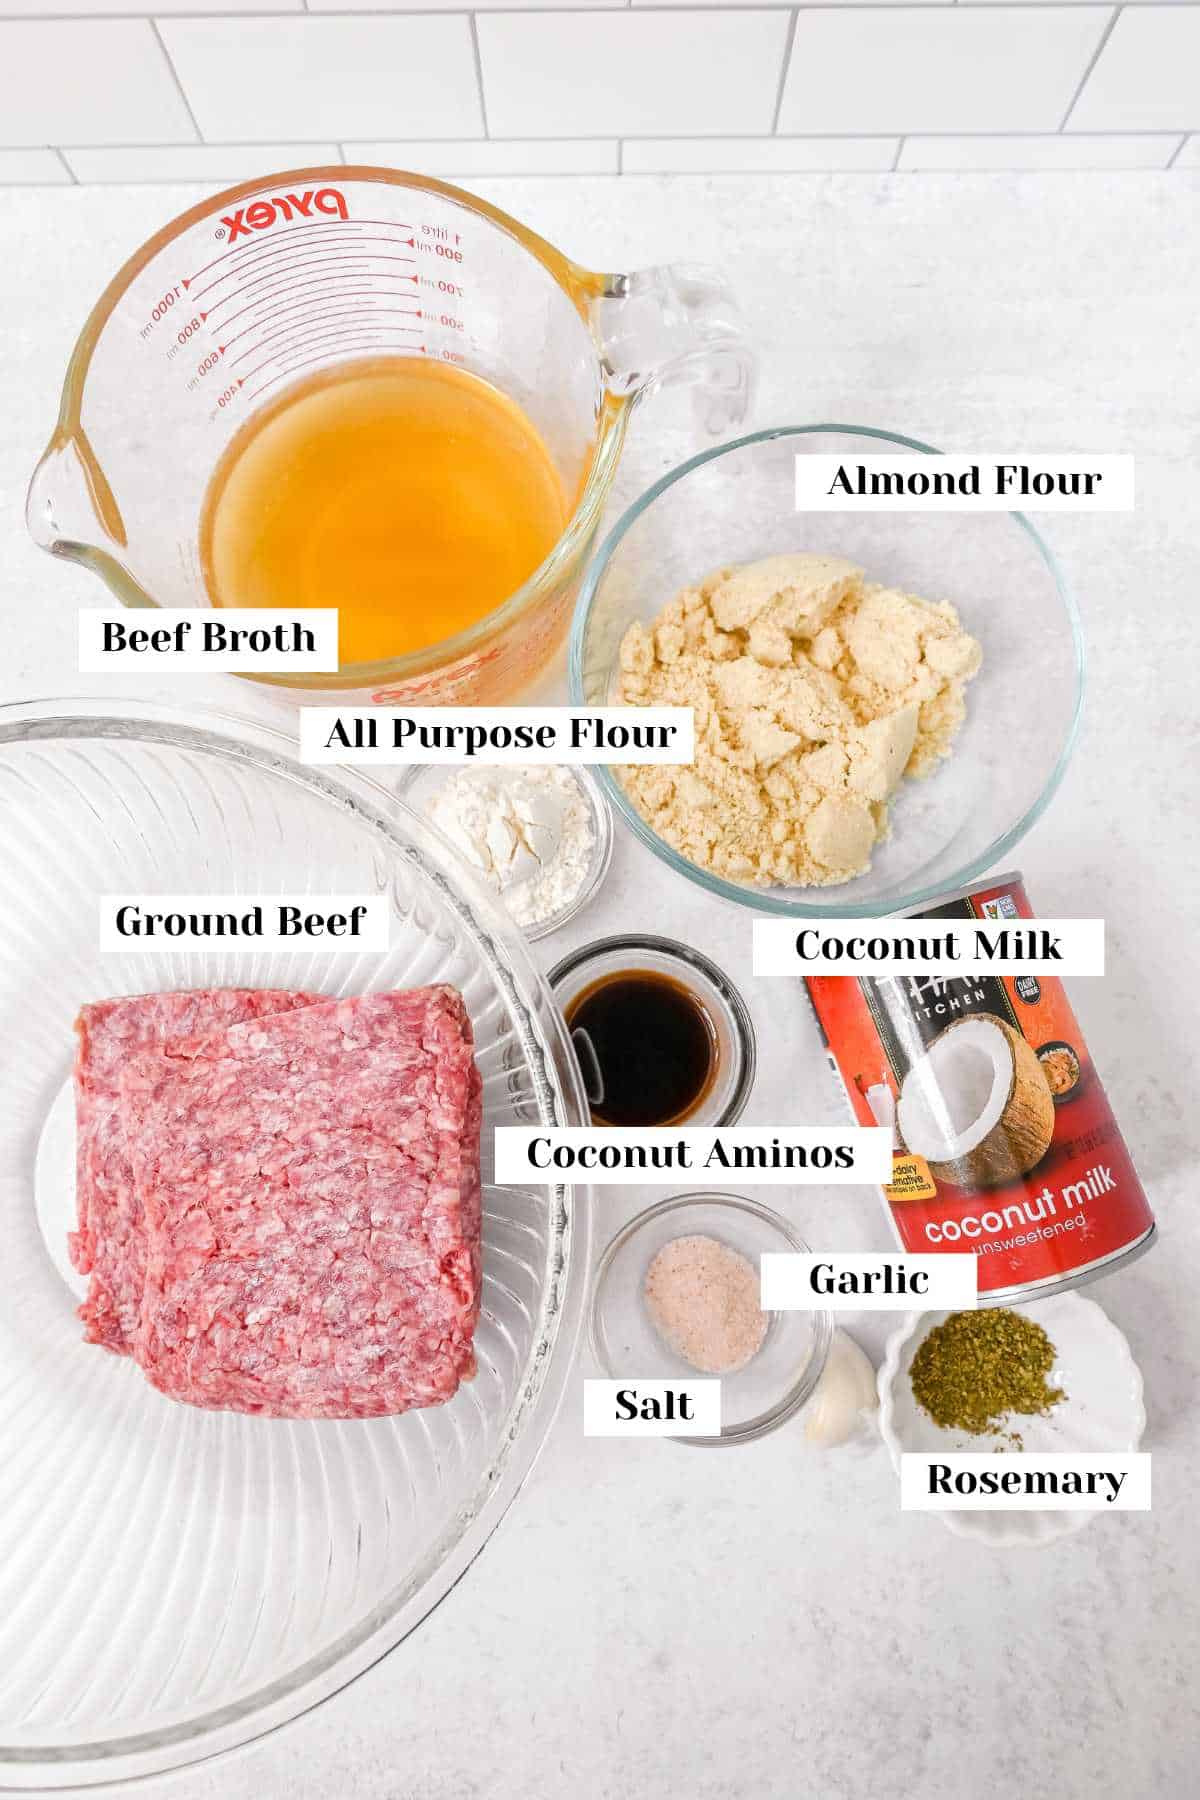 labeled ingredients for this one pot swedish meatball recipe.